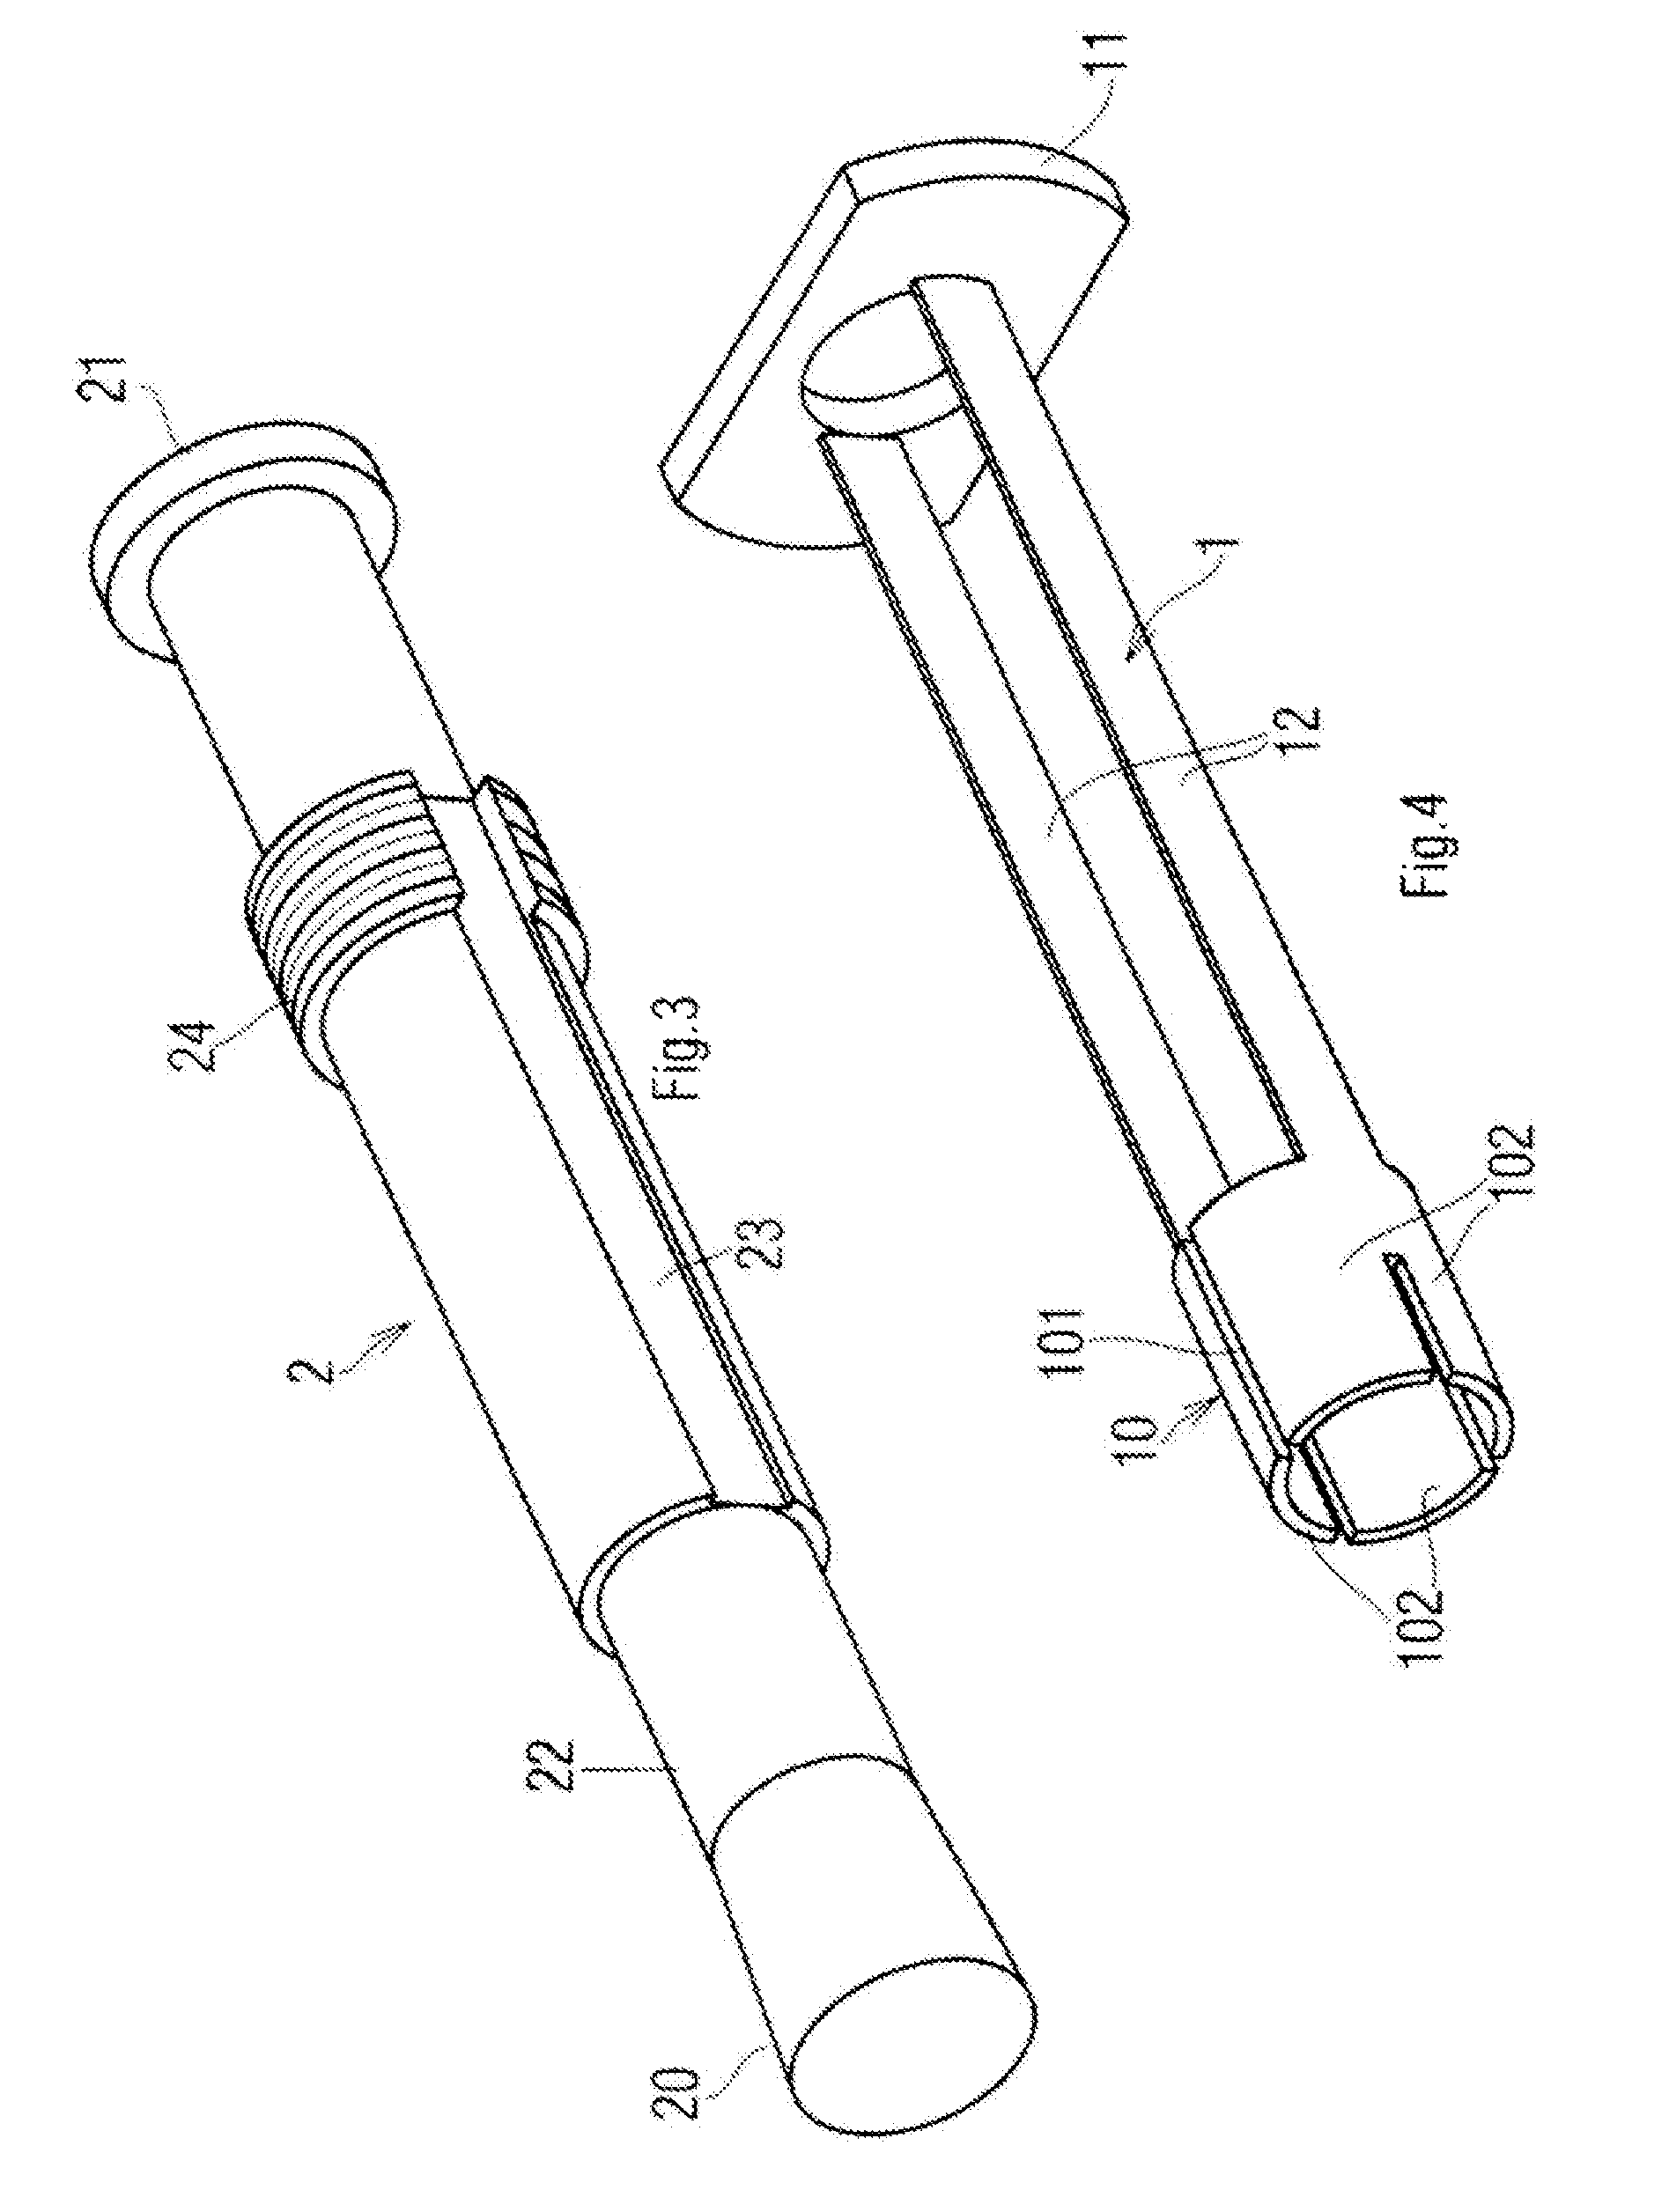 Removable anchoring device usable as a suspension bolt